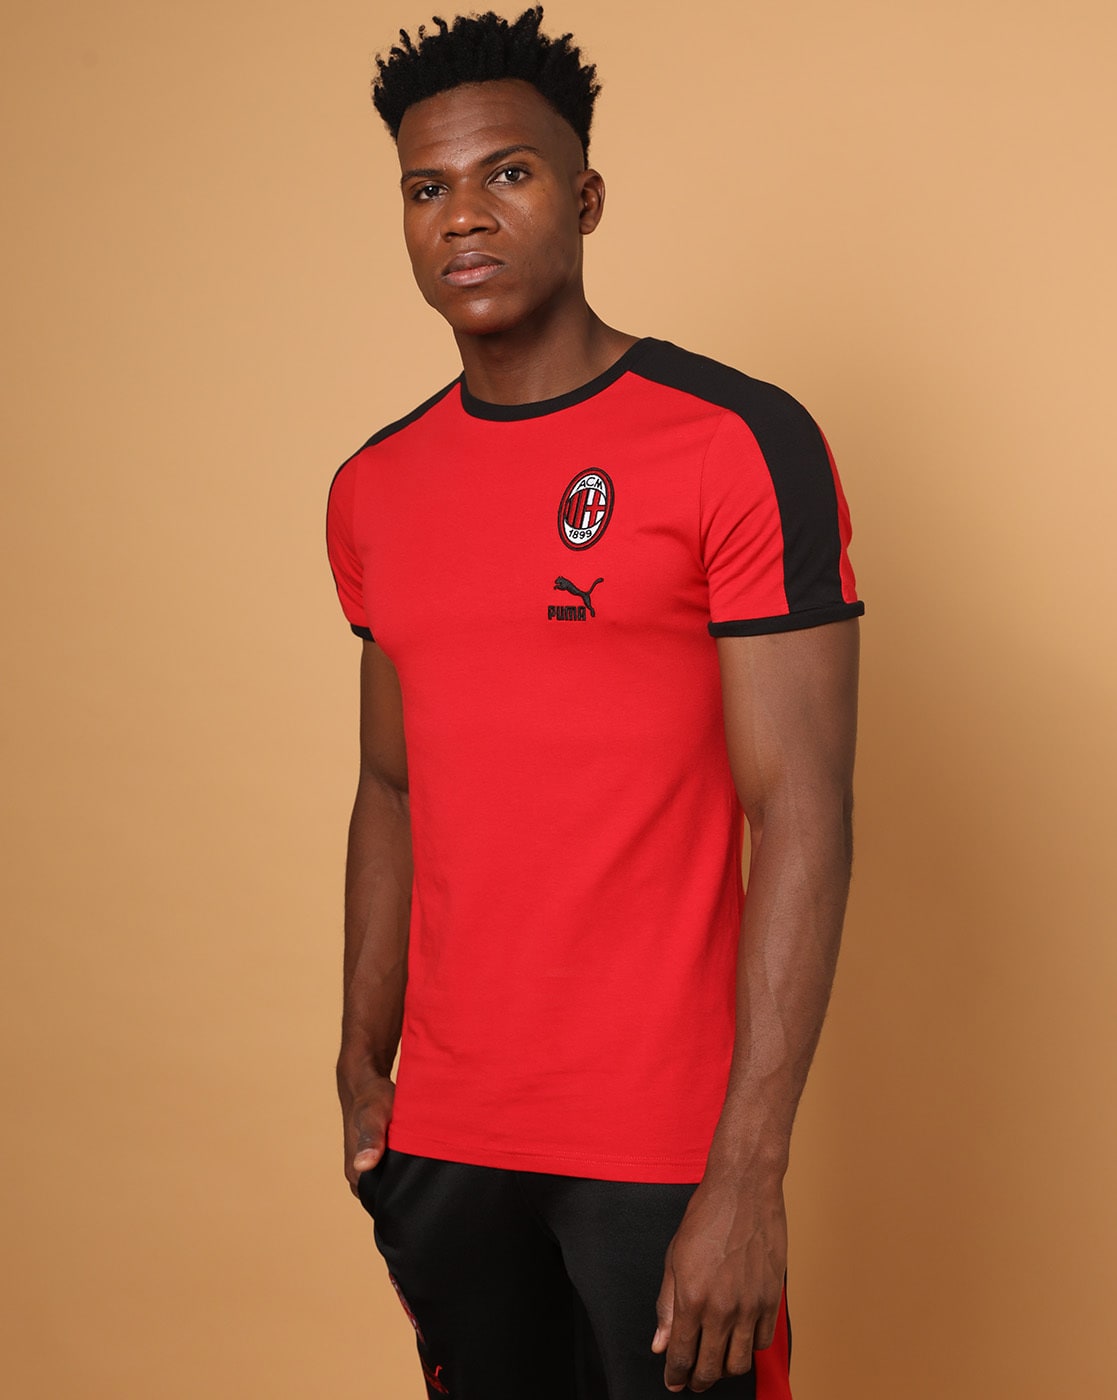 Buy Red & Black Tshirts for Men by Puma Online